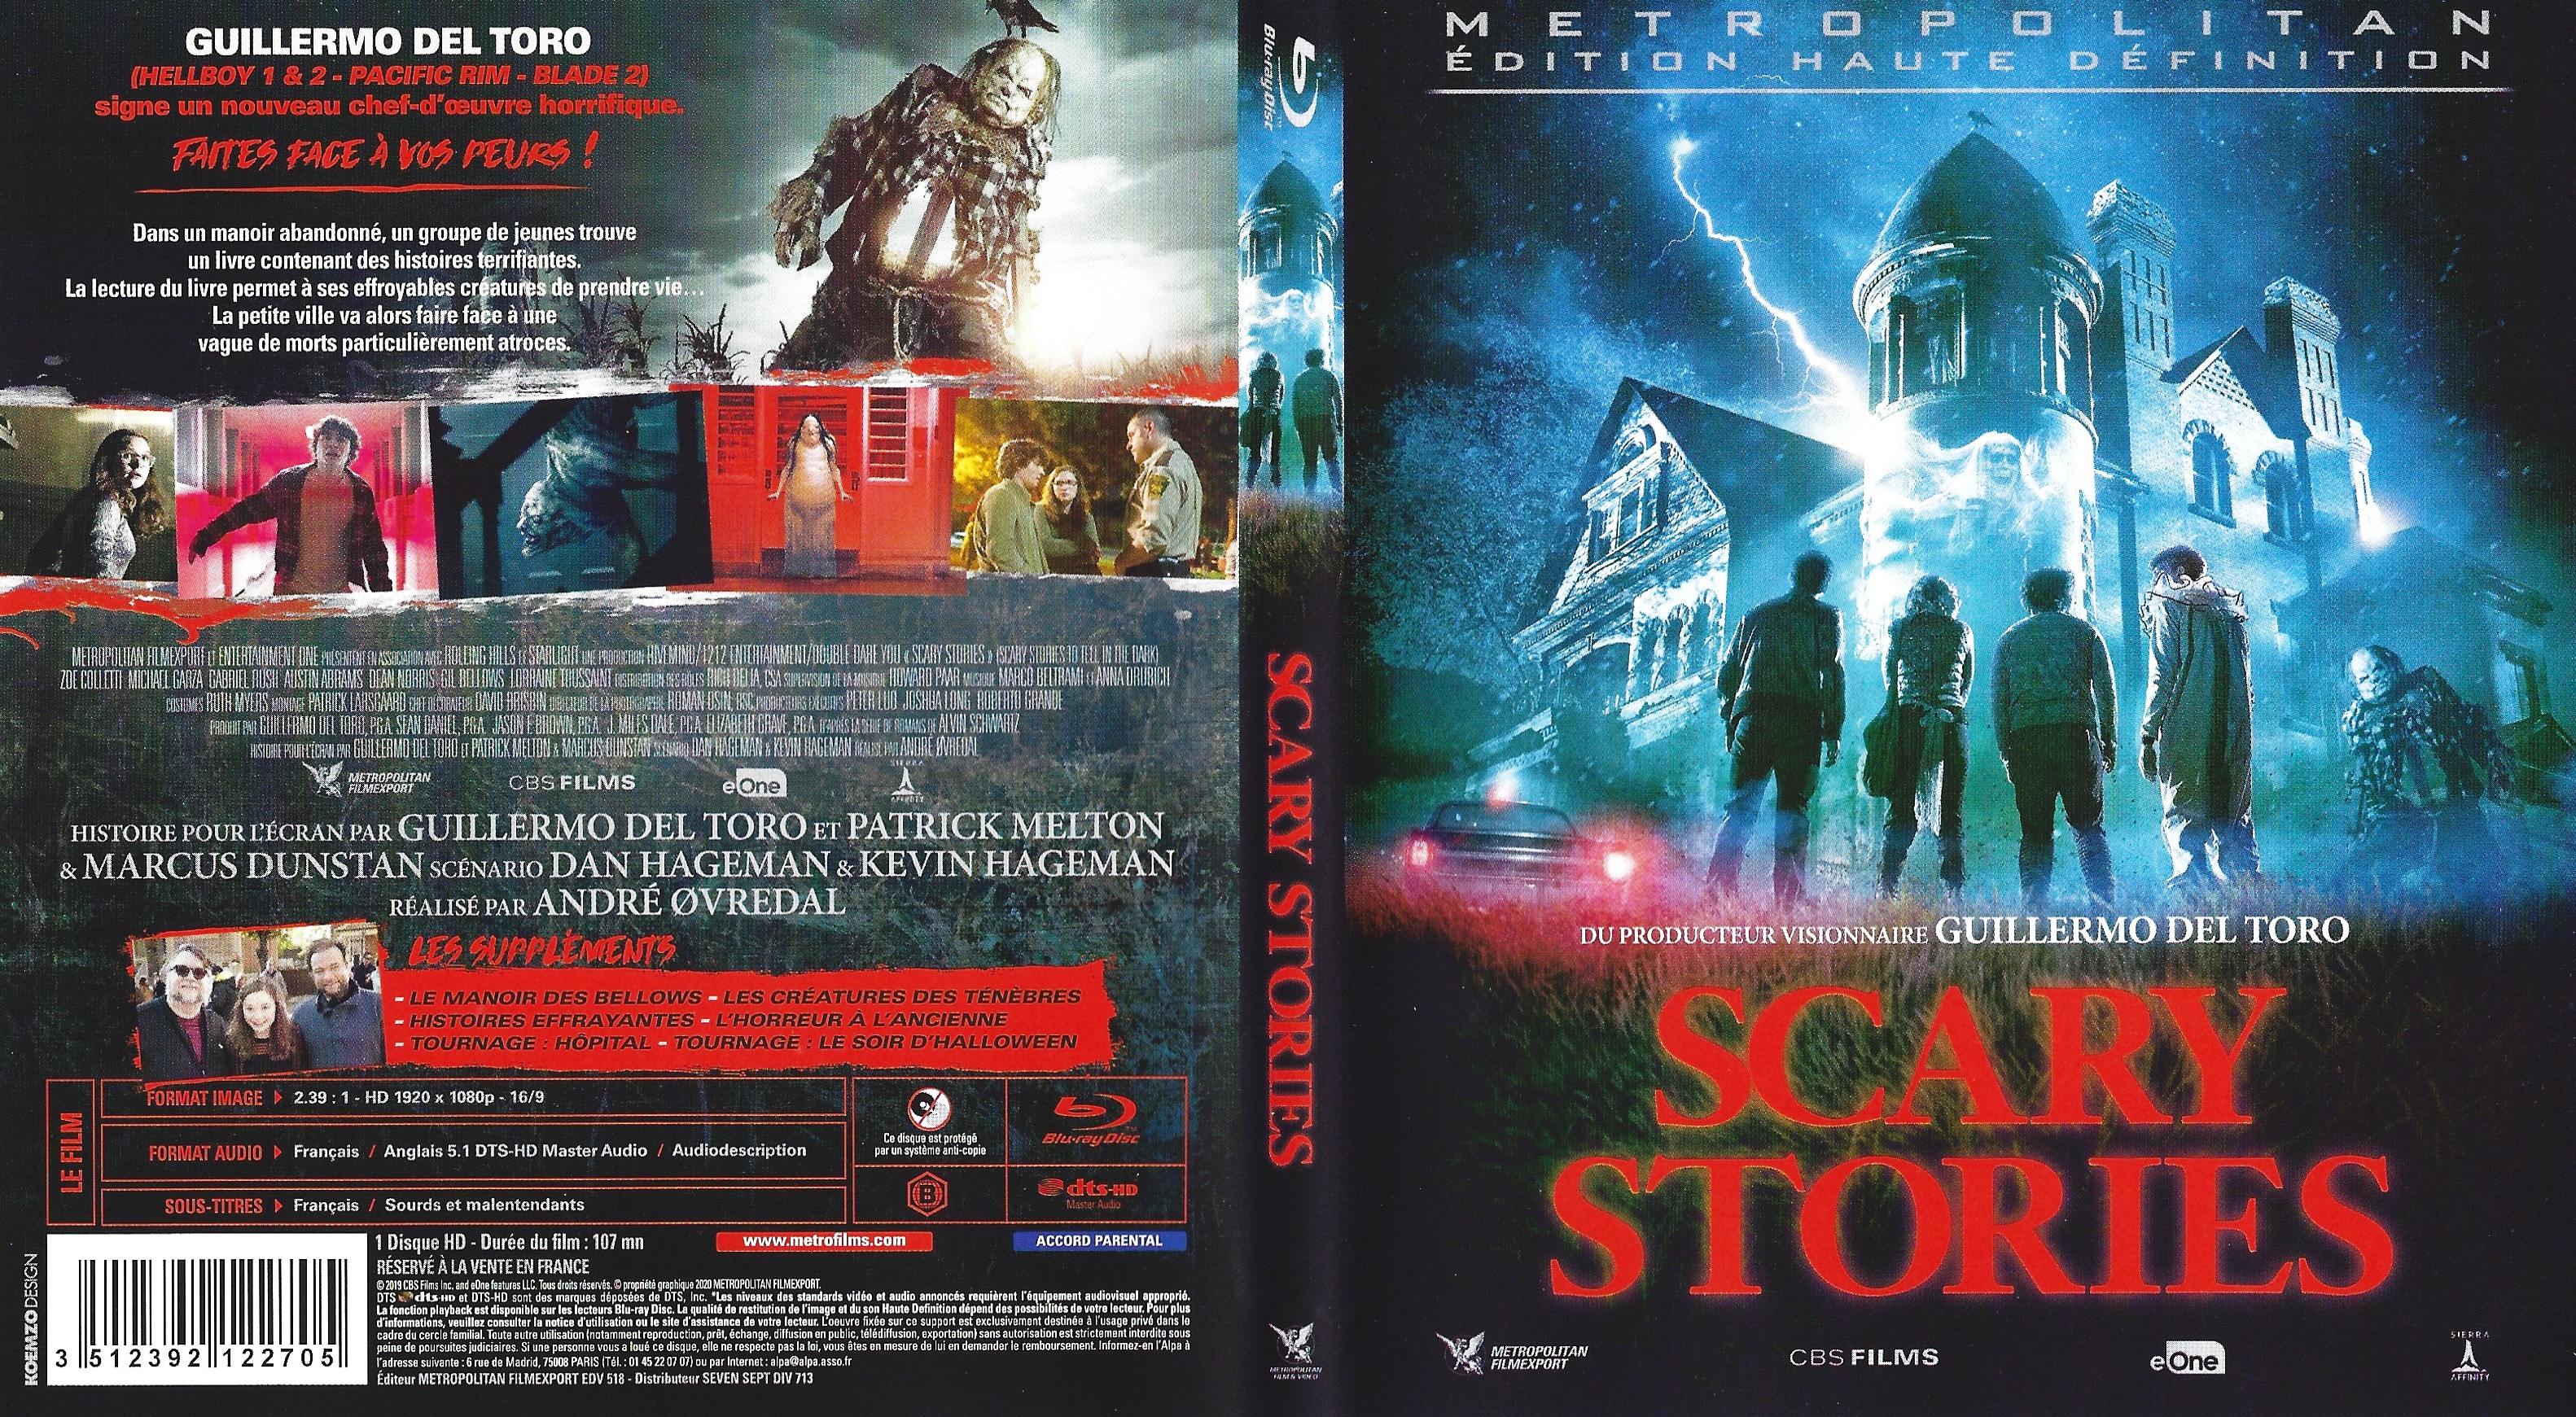 Jaquette DVD Scary Stories (BLU-RAY)